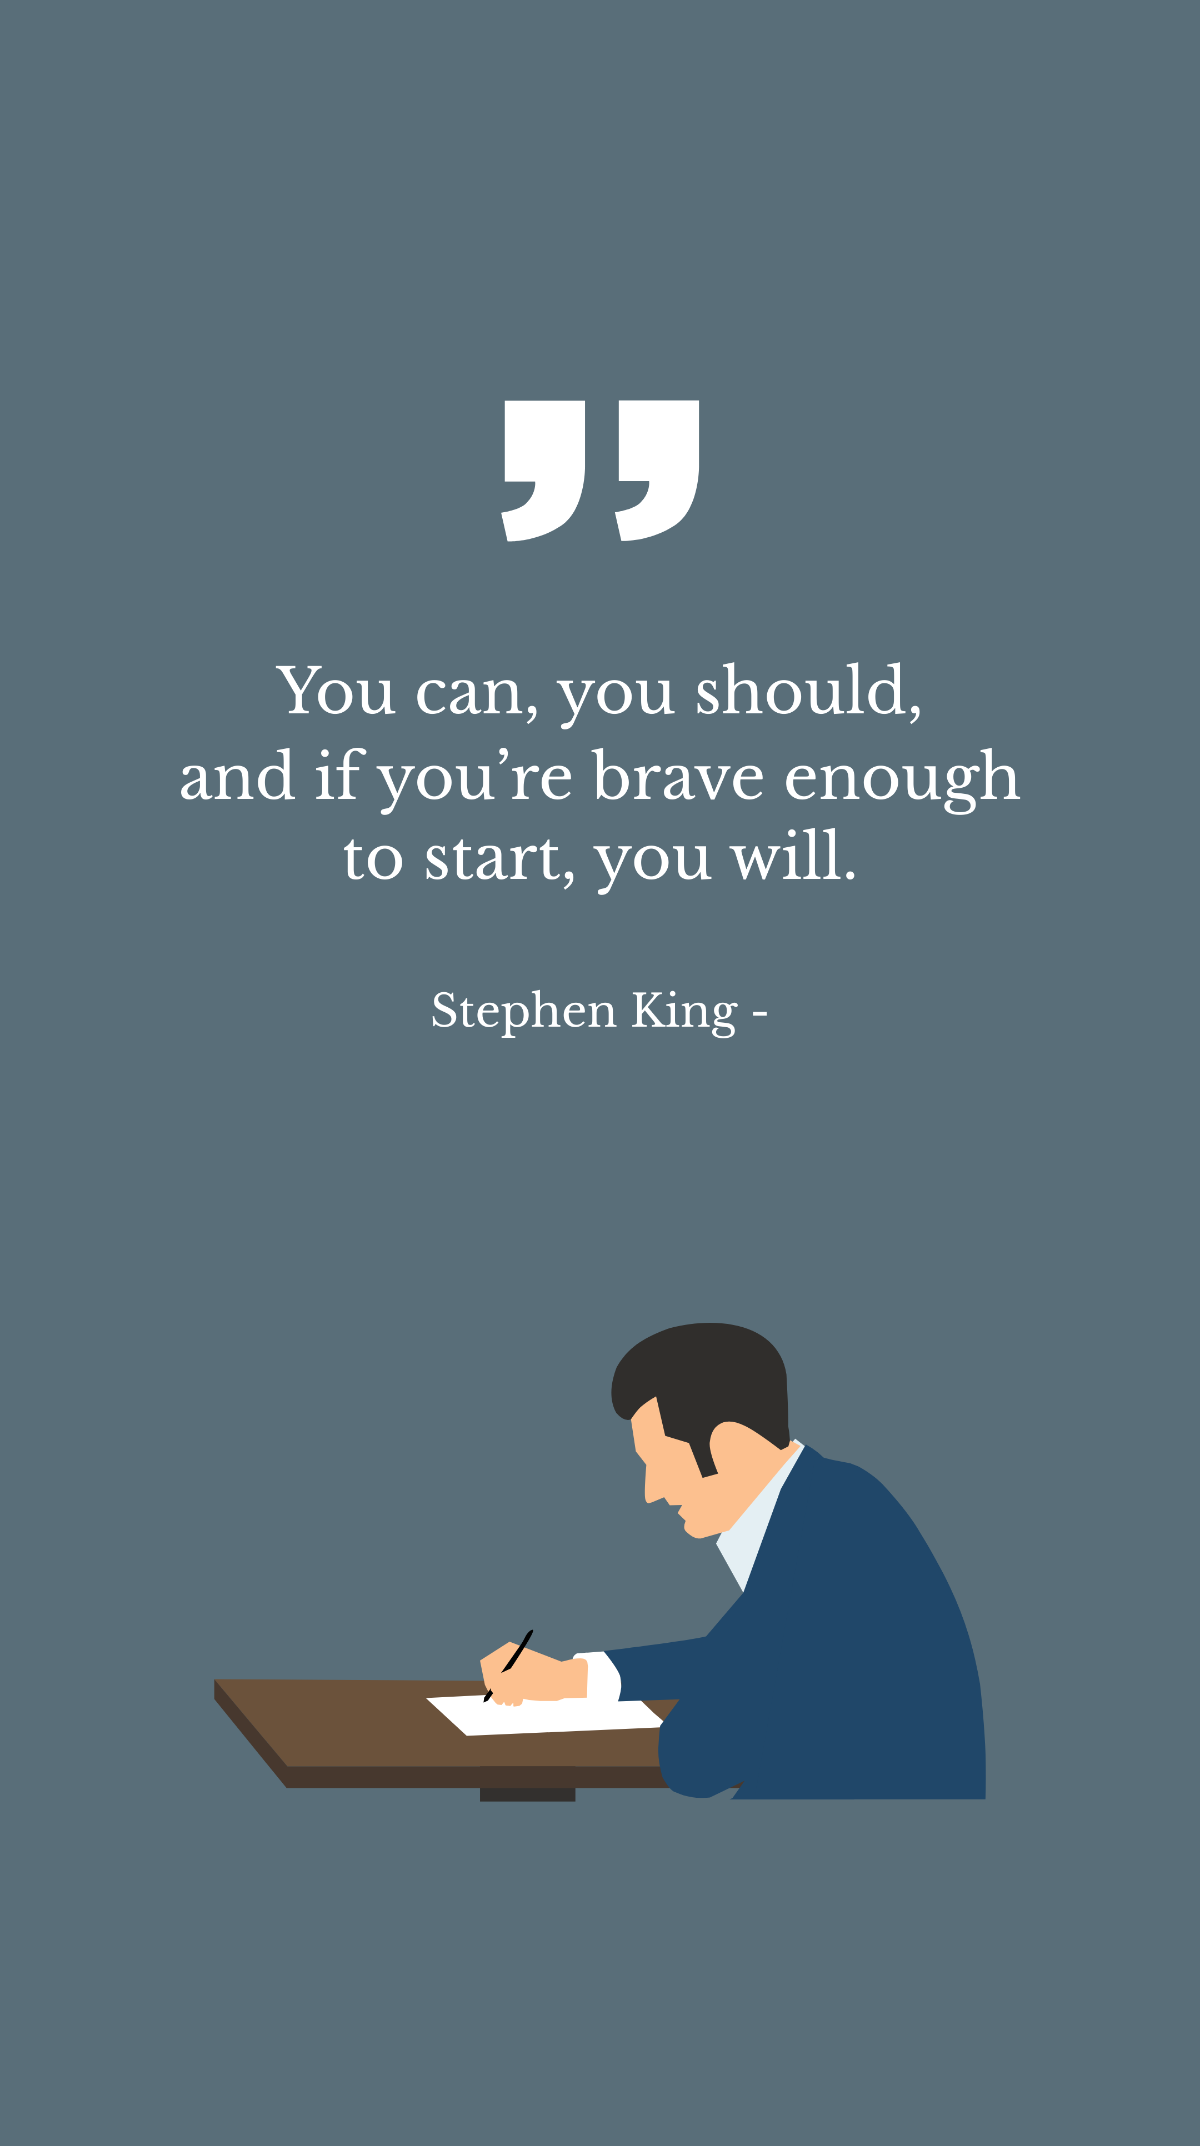 Stephen King - You can, you should, and if you’re brave enough to start, you will. Template